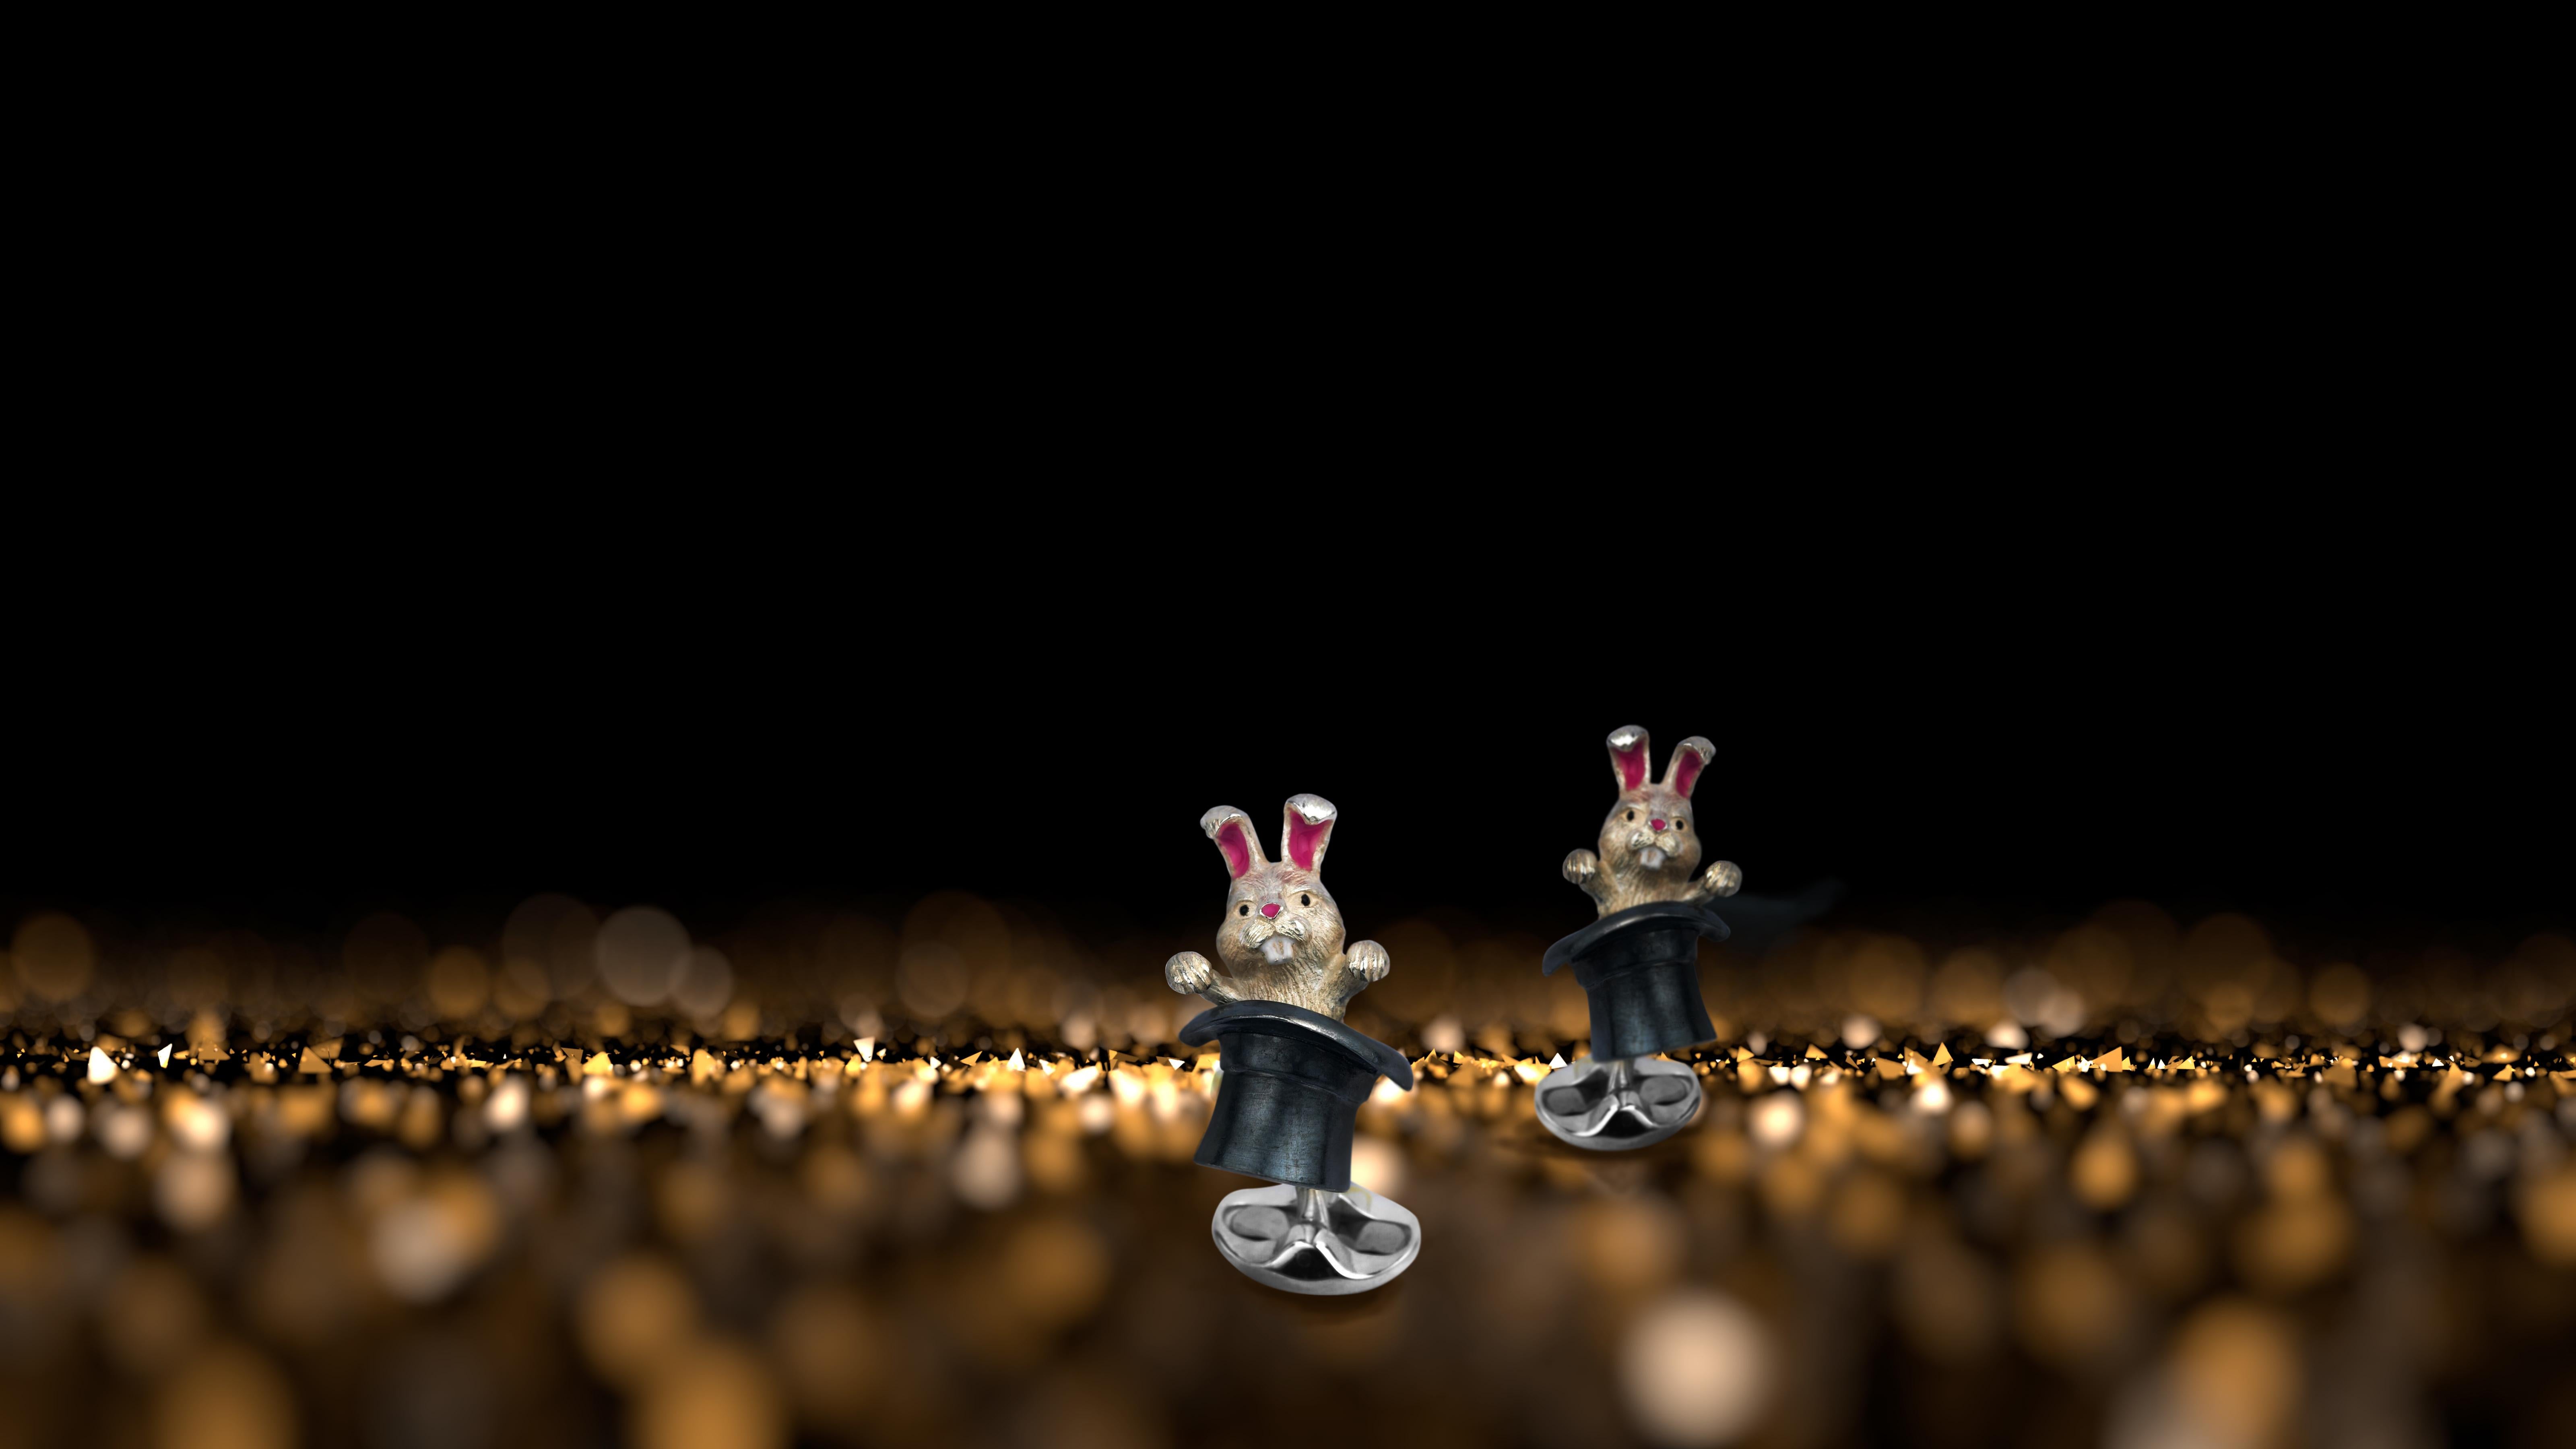 DEAKIN & FRANCIS, Piccadilly Arcade, London

These marvellously magical sterling silver Rabbit in Hat cufflinks will magic up wonders on your shirt cuffs.

These 'magical' rabbit in hat cufflinks possess a mystic feature that allows the rabbit to